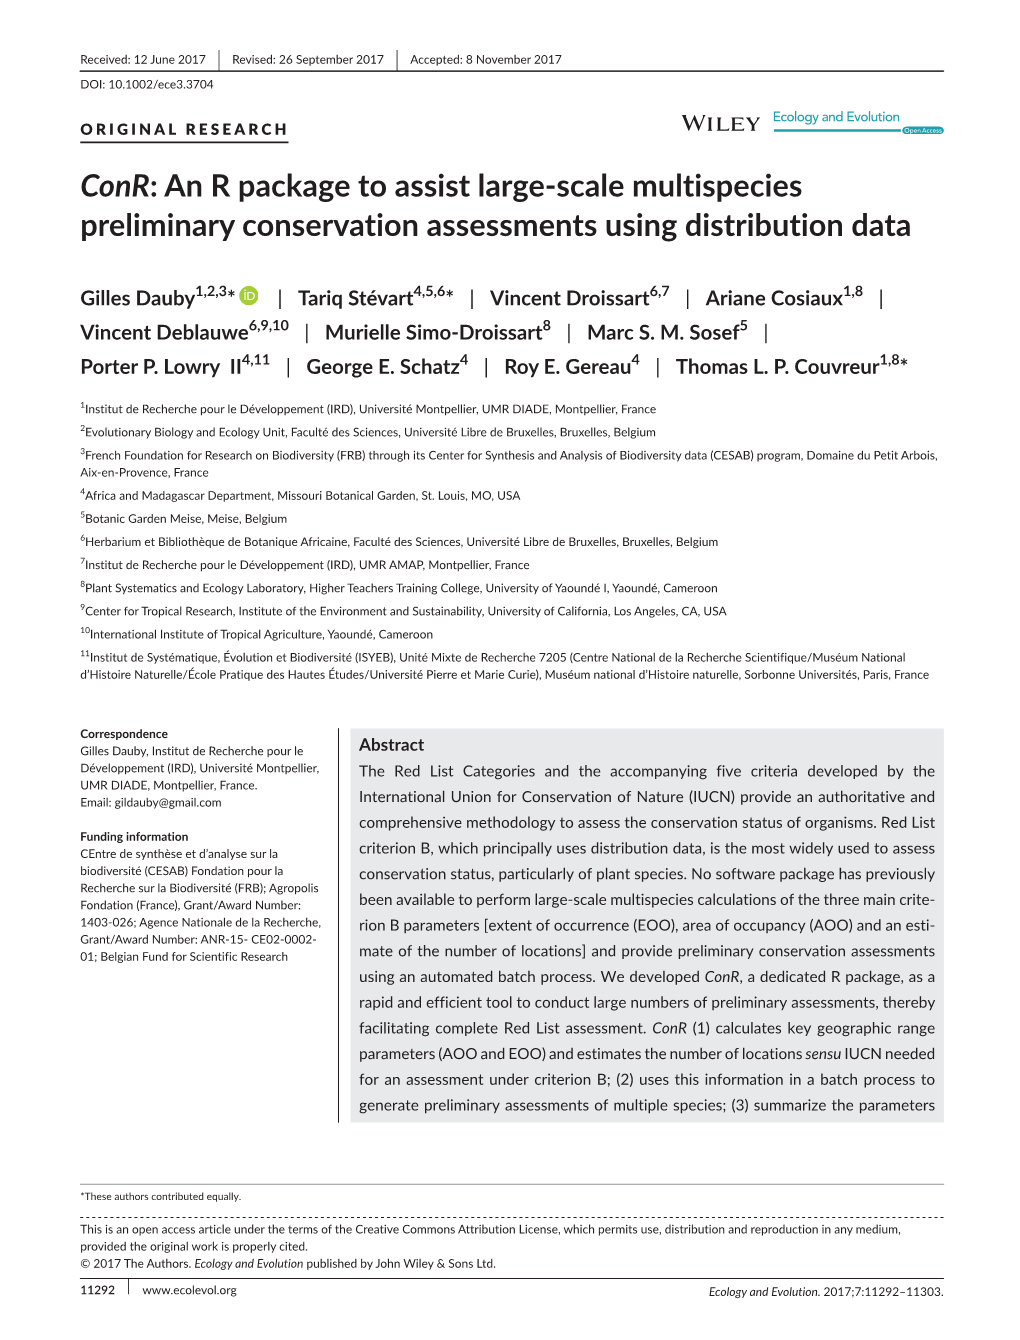 Conr : an R Package to Assist Large-Scale Multispecies Preliminary Conservation Assessments Using Distribution Data